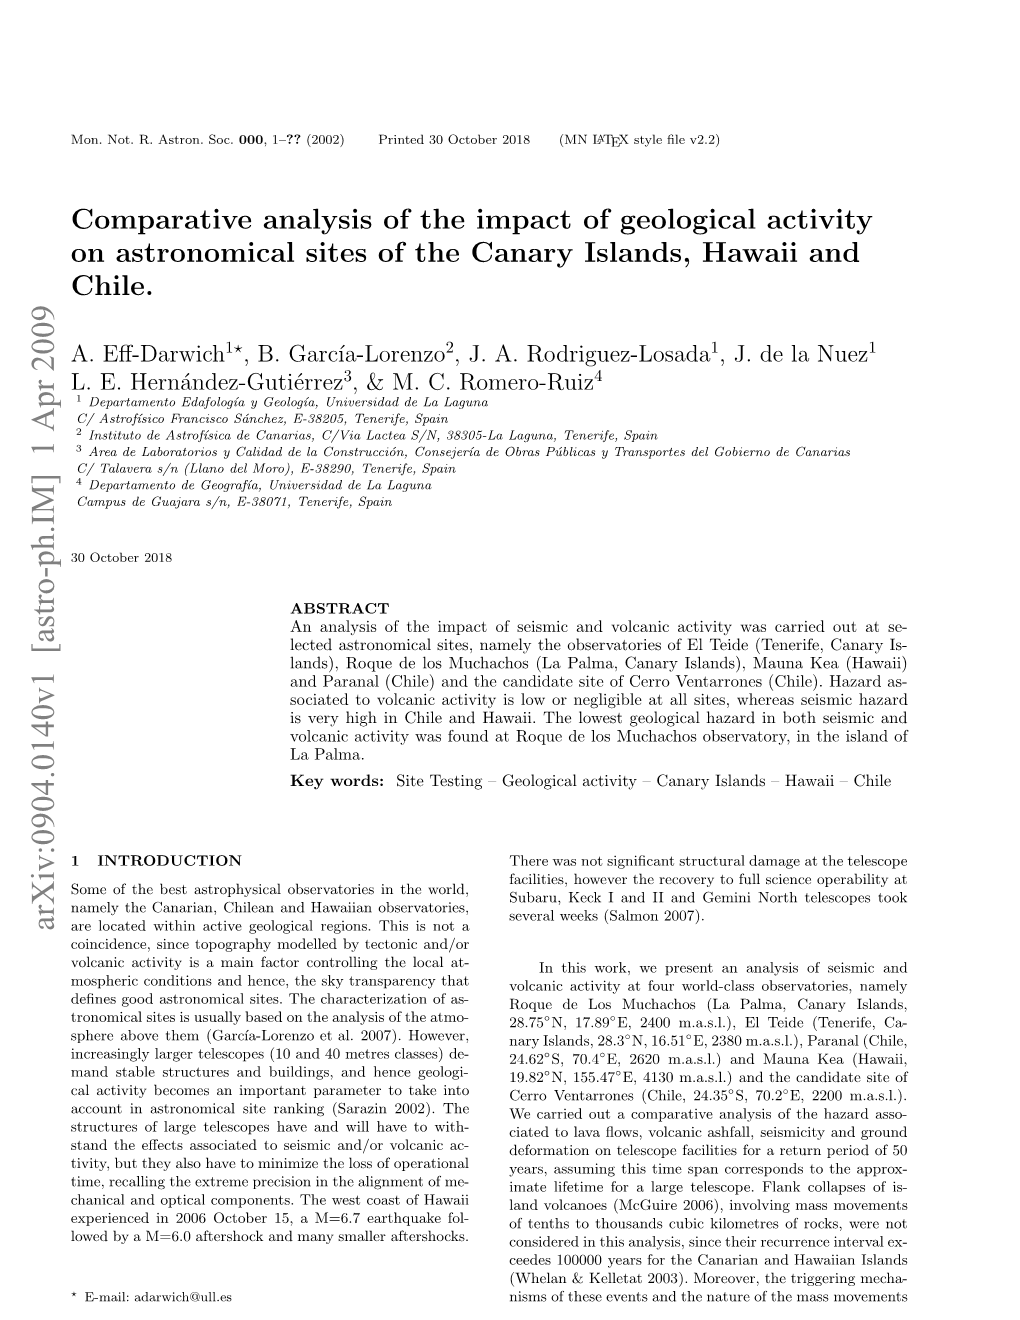 Comparative Analysis of the Impact of Geological Activity on Astronomical